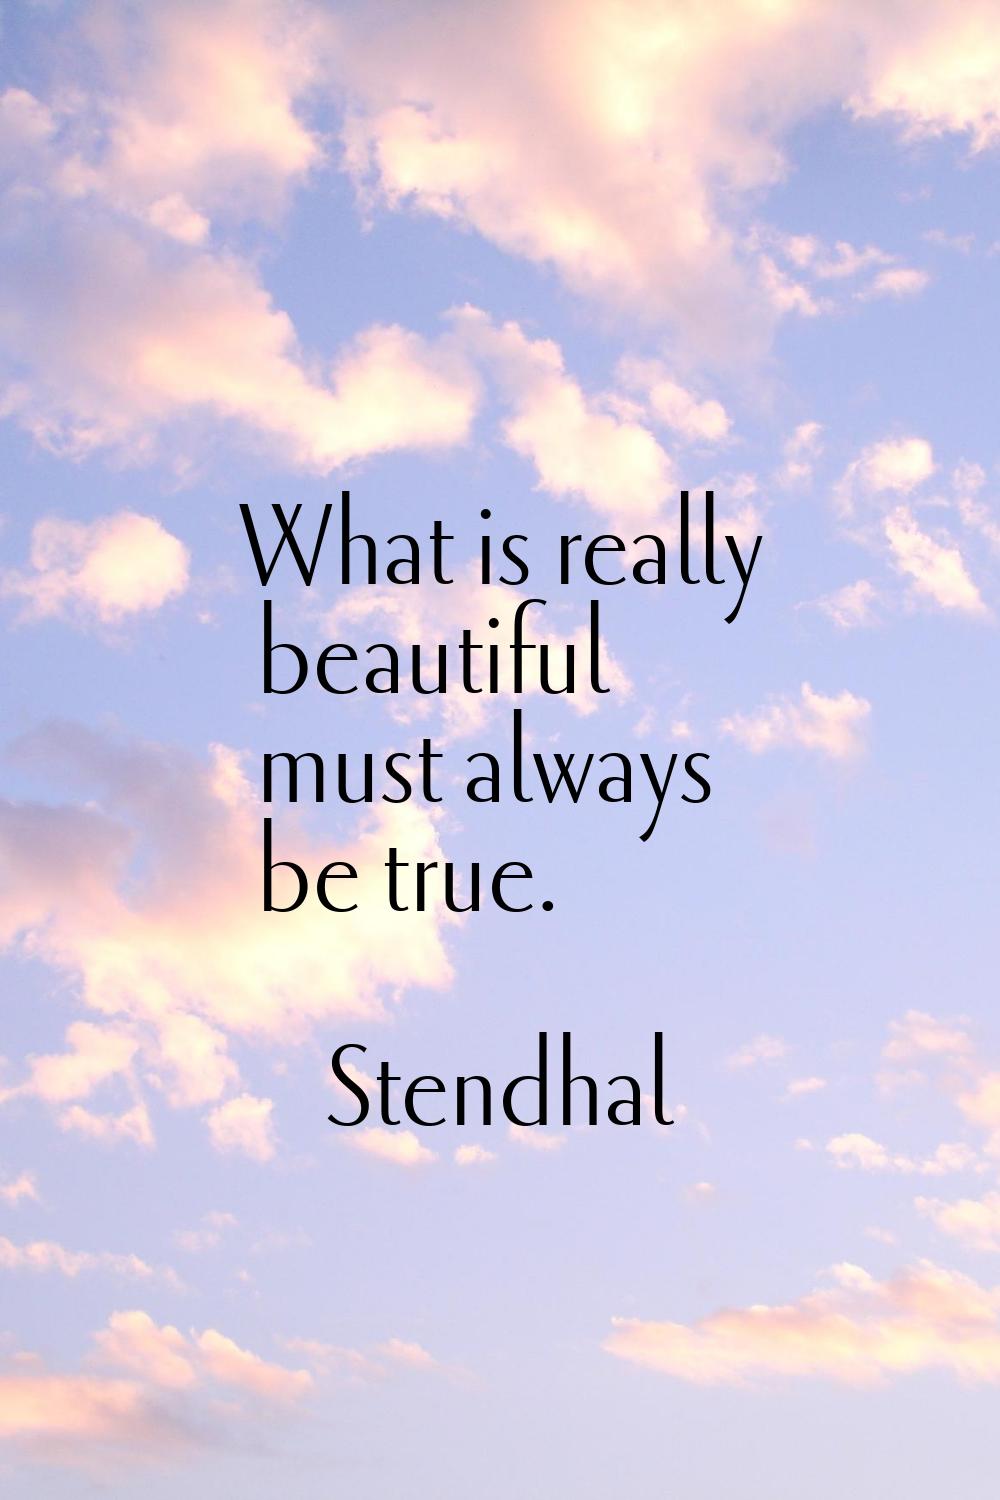 What is really beautiful must always be true.